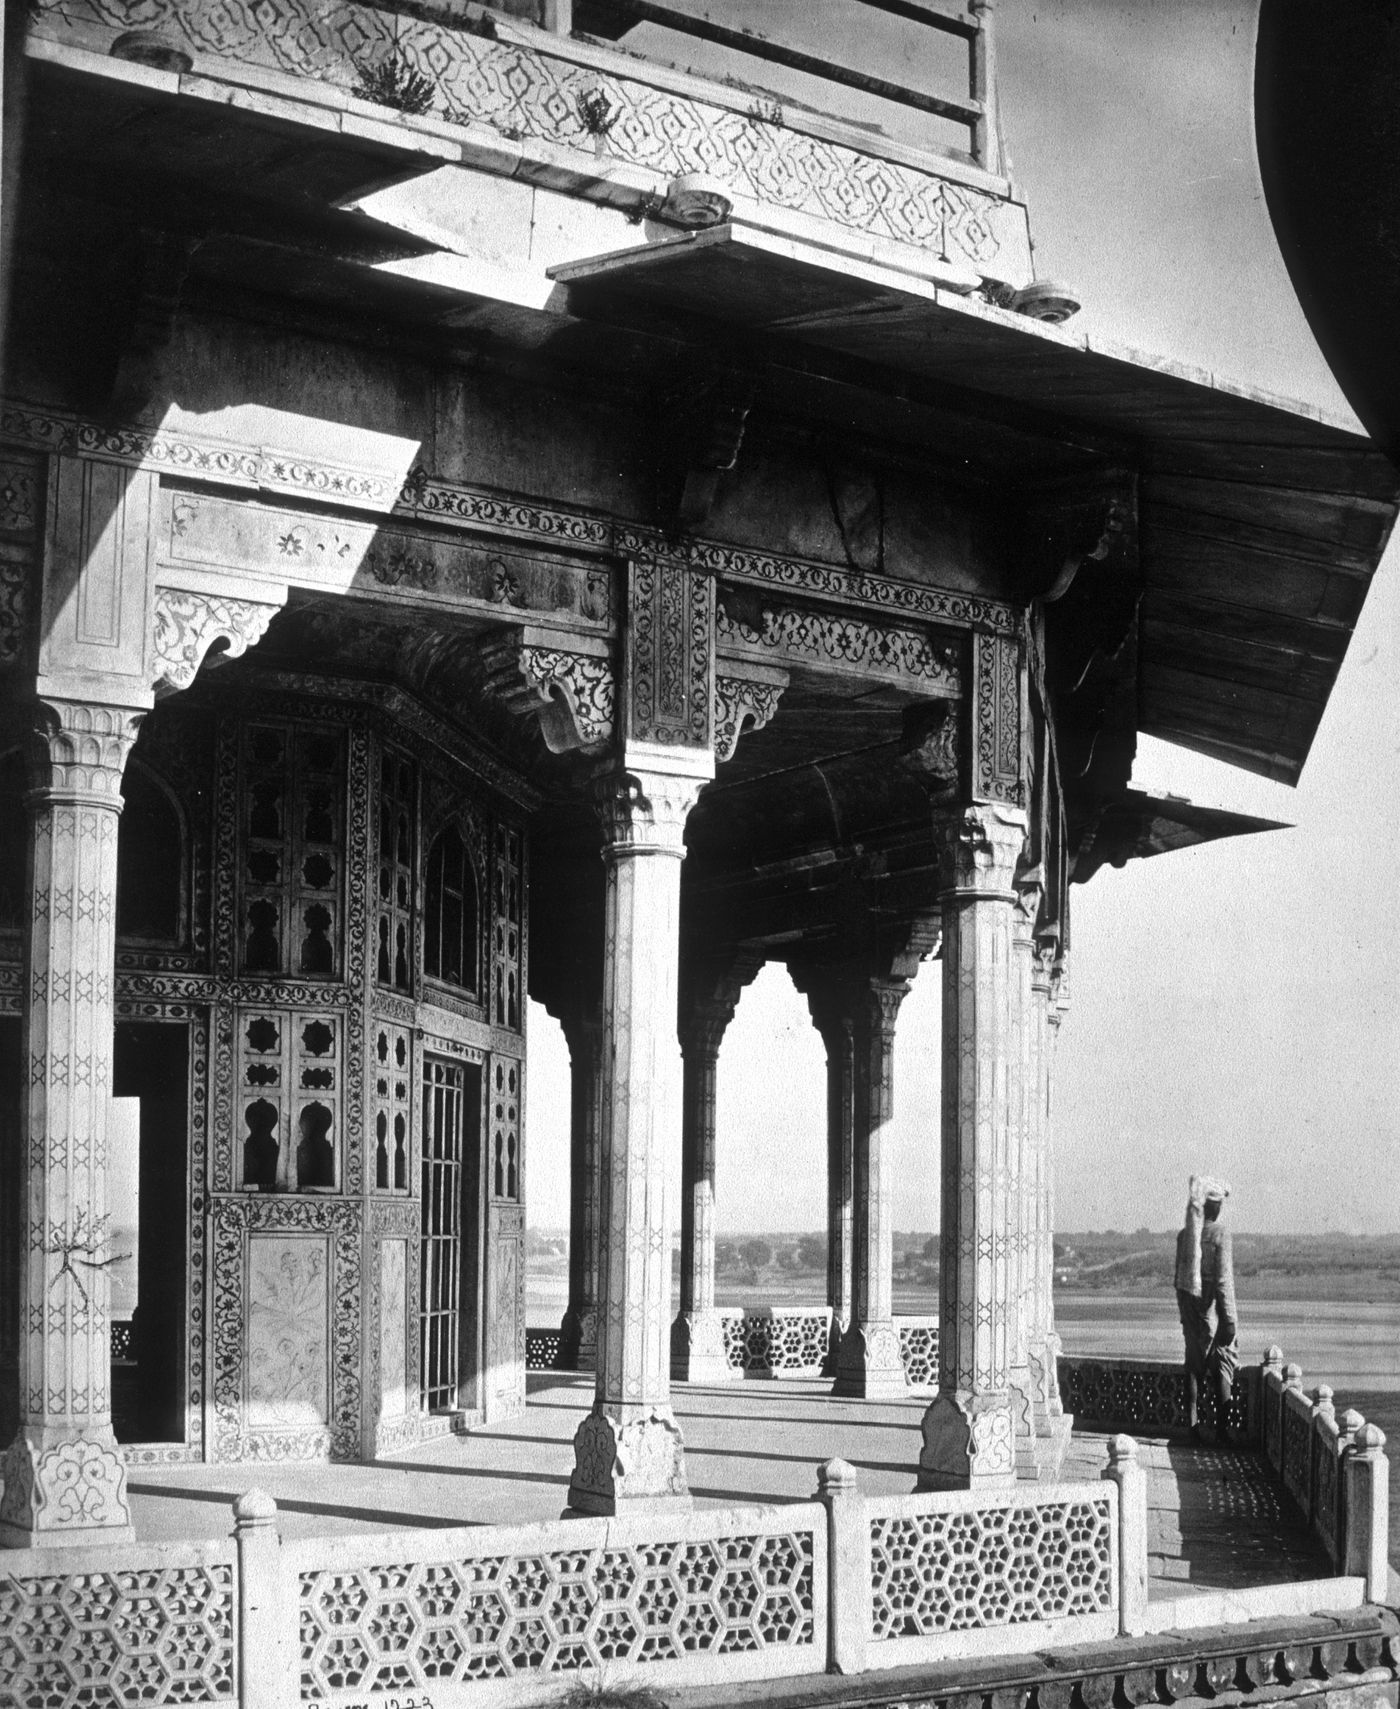 View of a porch [?] of the Zenana (also known as the Ladies' Pavilion) overlooking the Yamuna River (also known as the Jumna River), Agra Fort, Agra, India